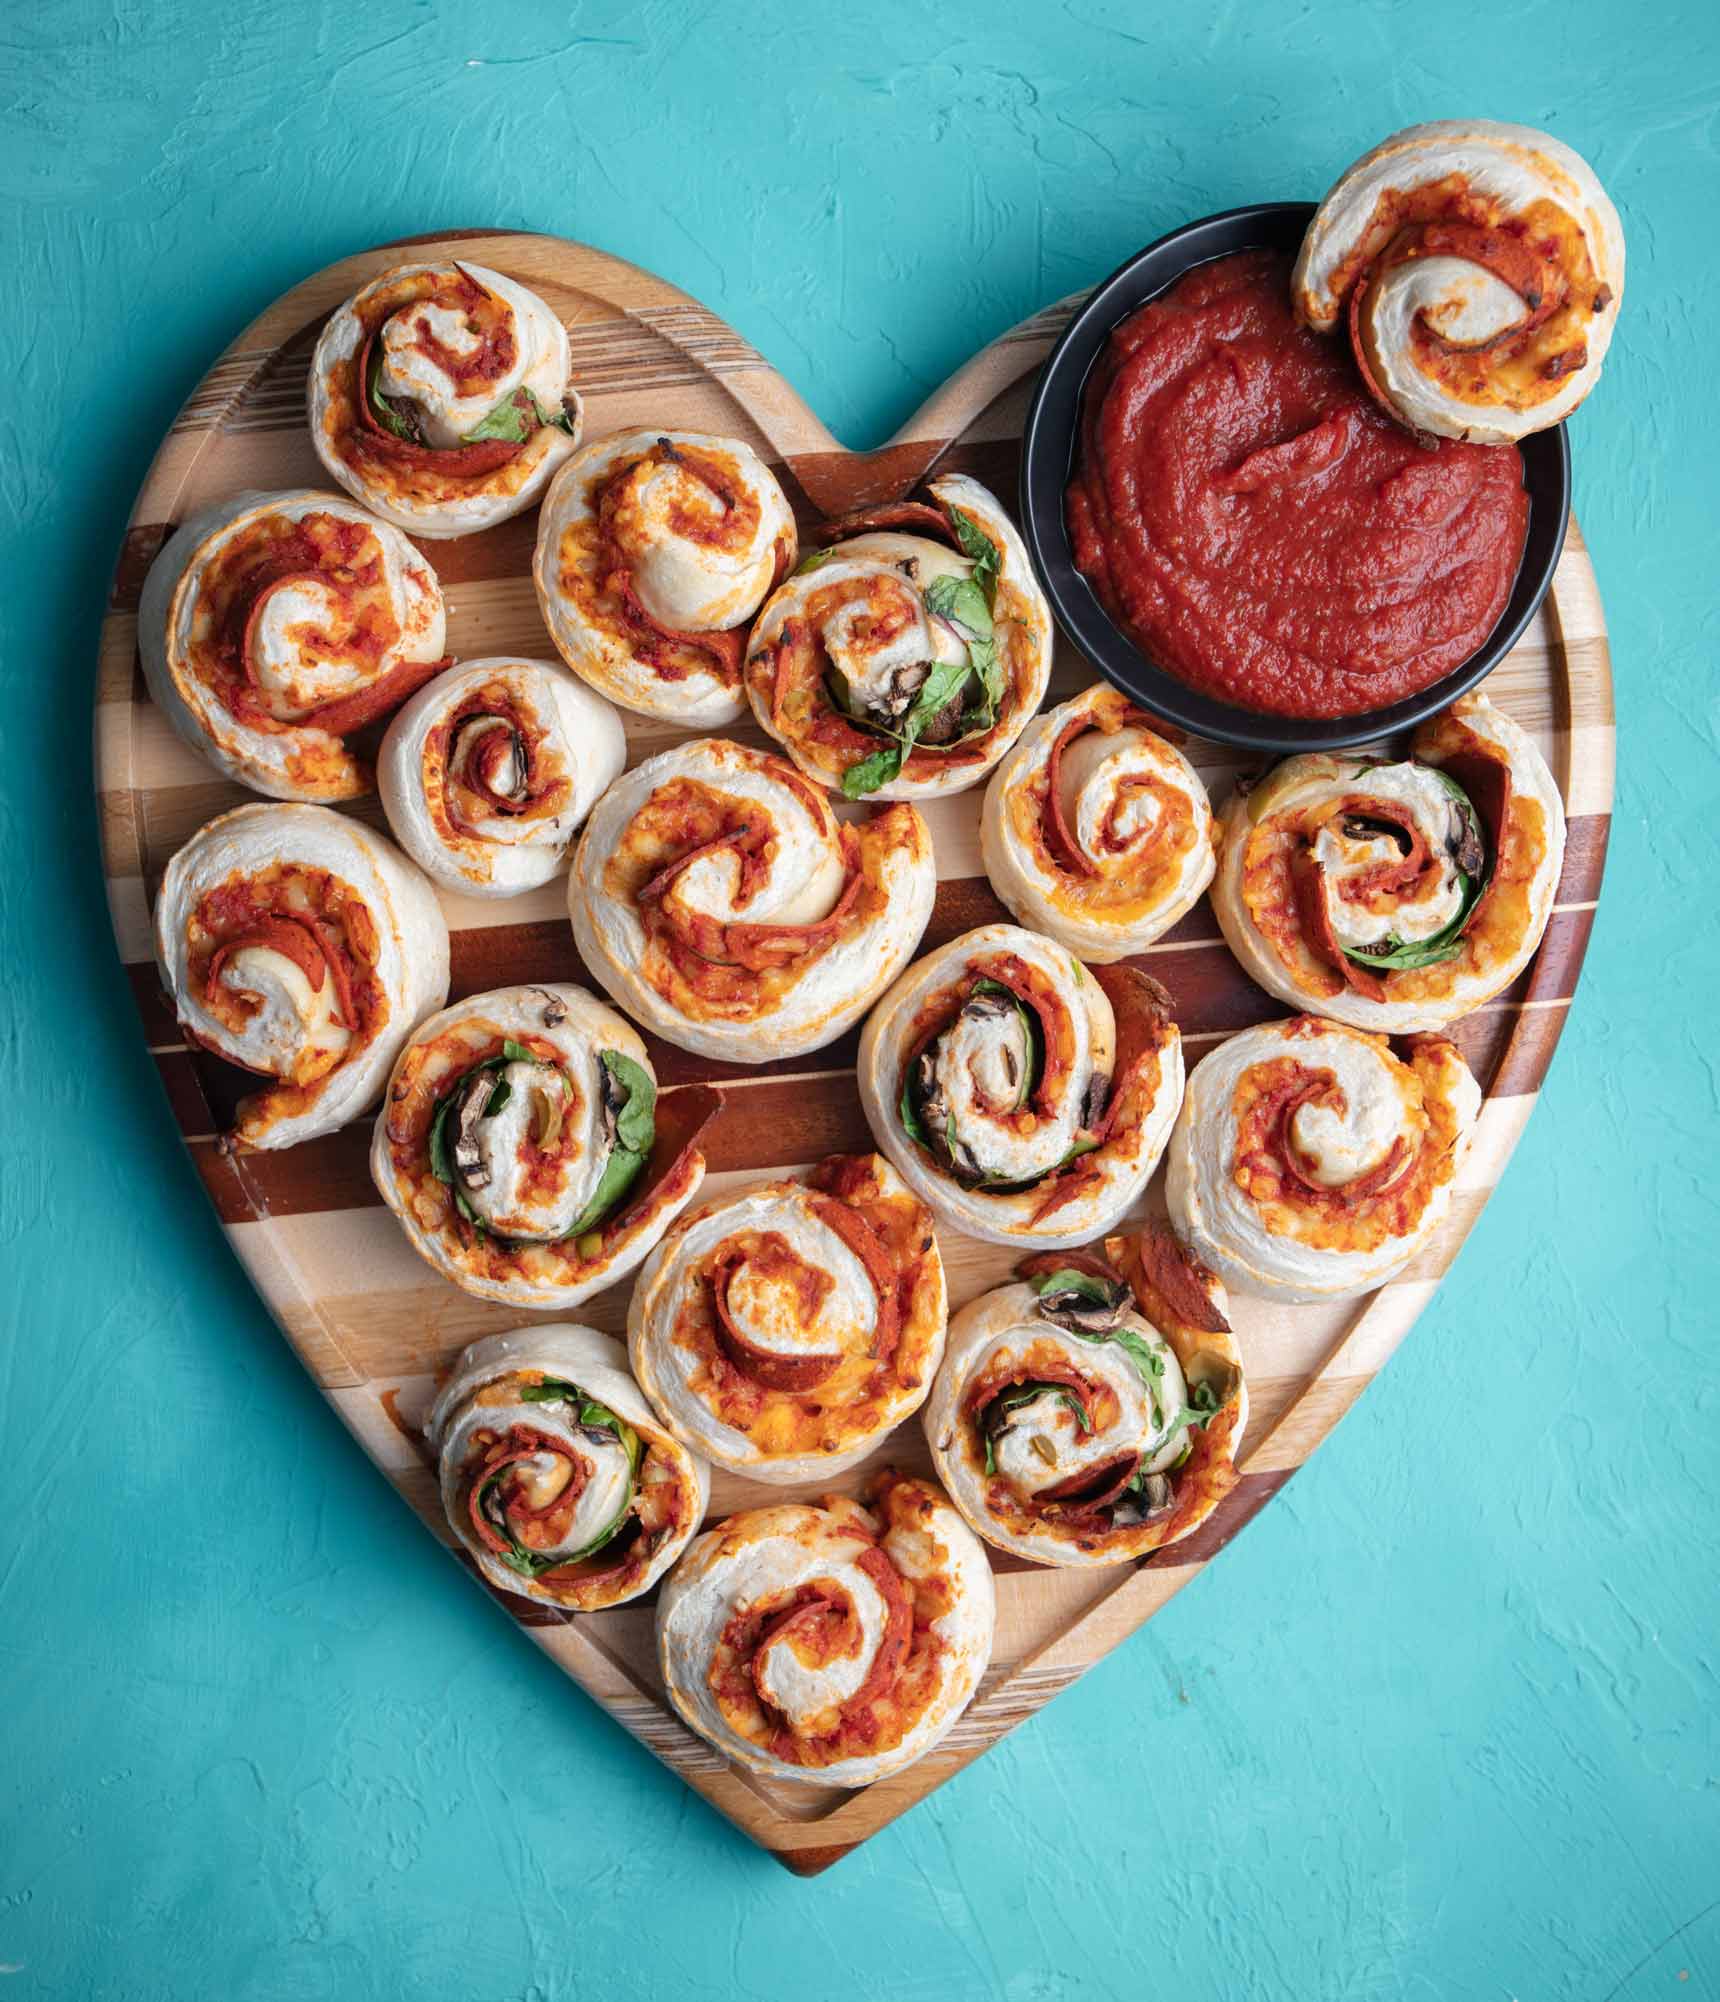 homemade vegan pizza rolls on a heart-shaped cutting board with a side of pizza sauce for dipping